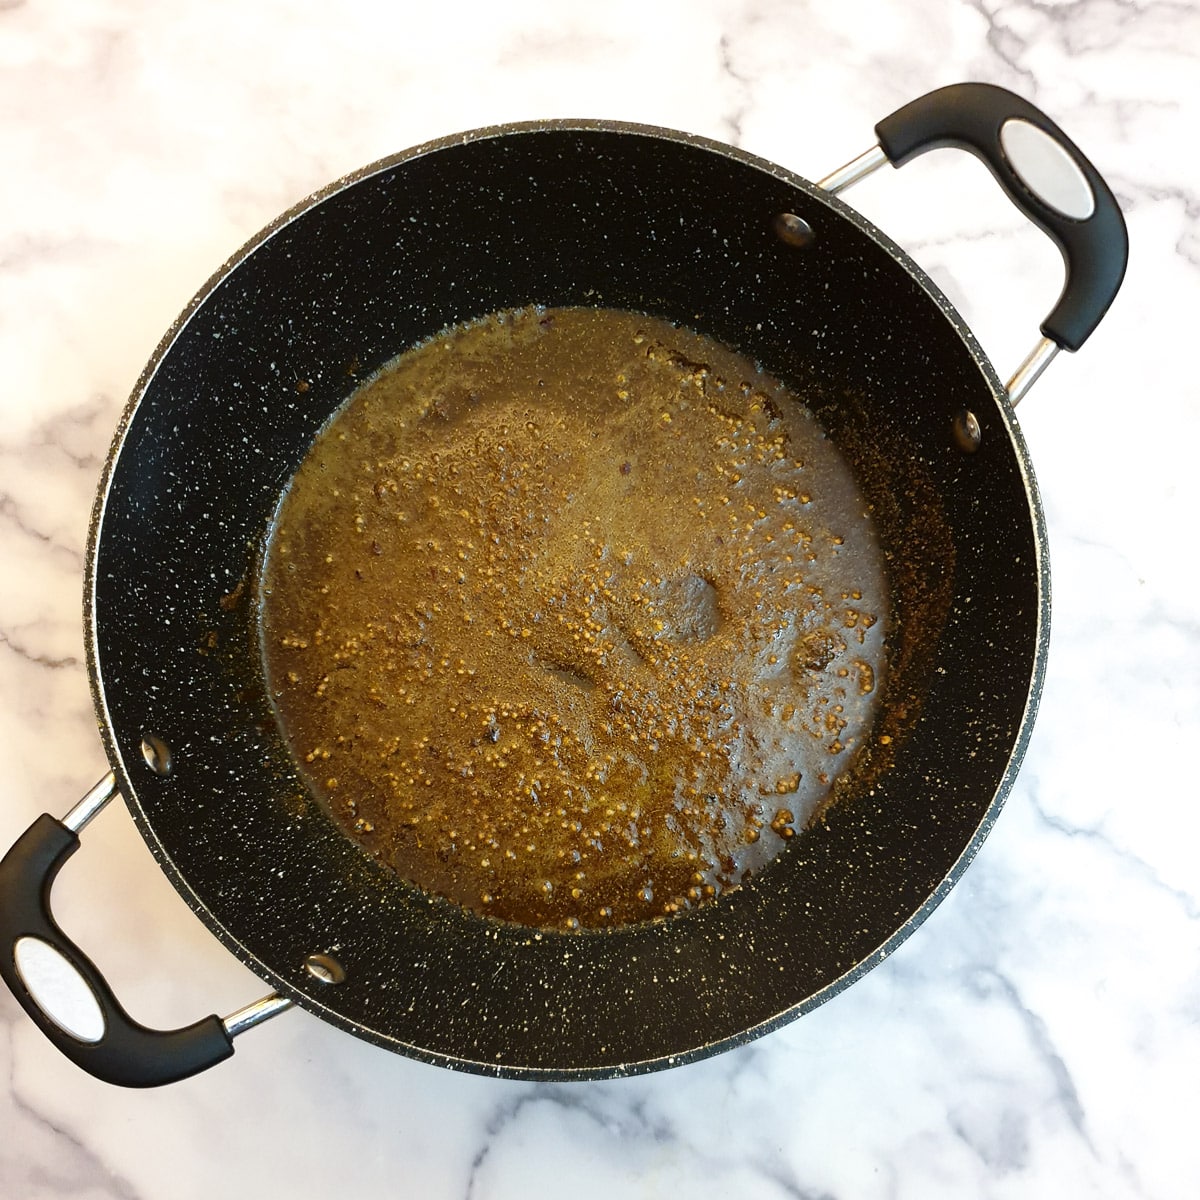 Spices frying in a frying pan.